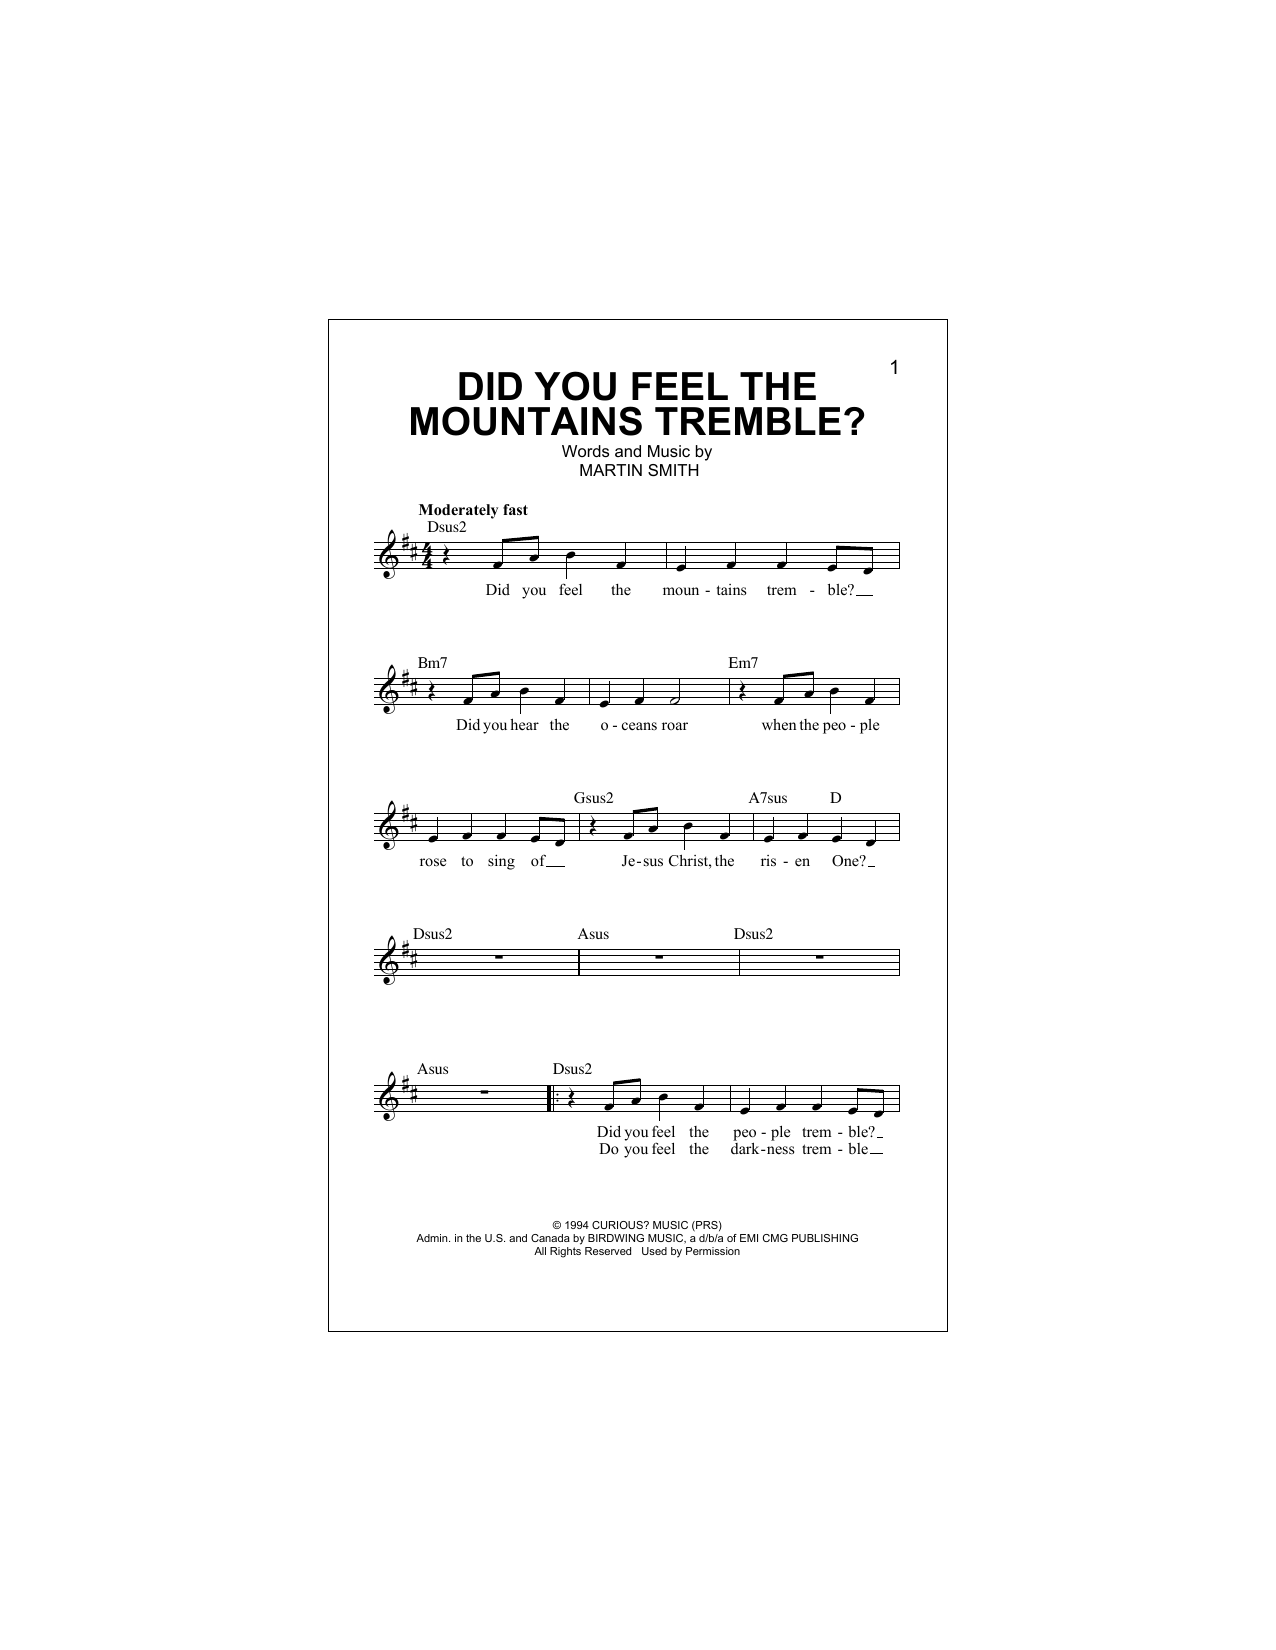 Download Passion Did You Feel The Mountains Tremble? Sheet Music